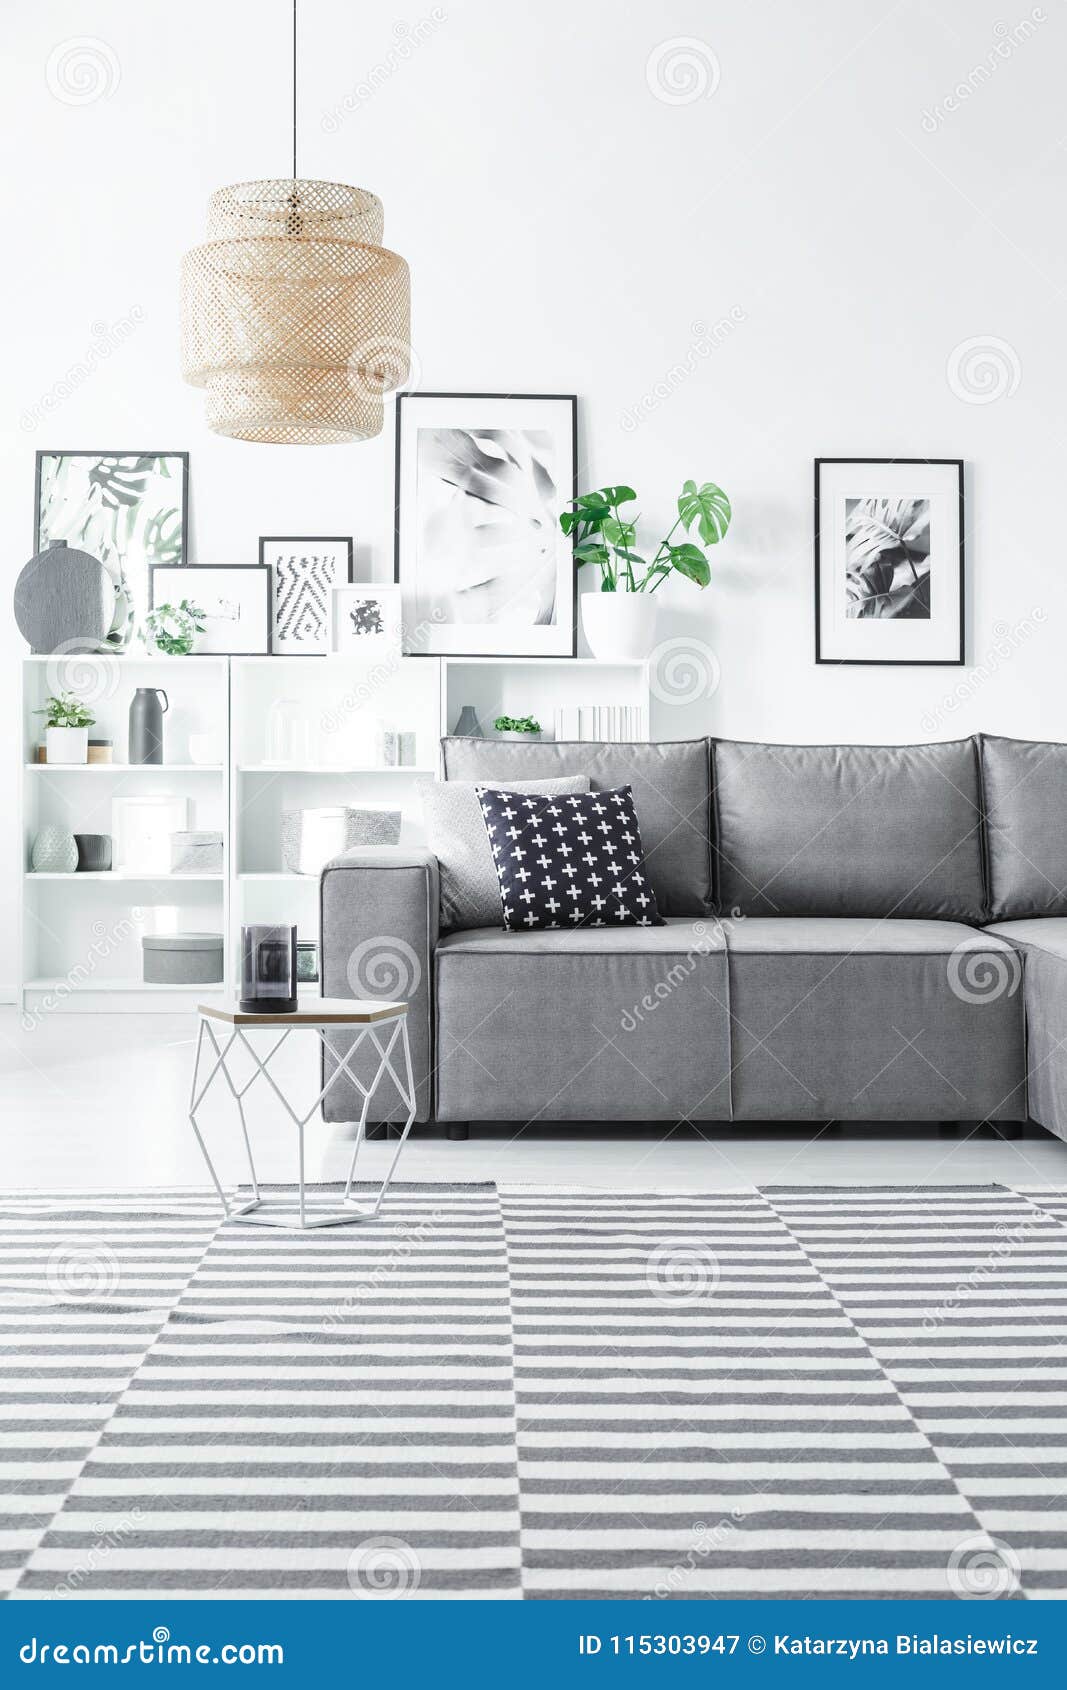 Gallery In Living Room Interior Stock Image Image Of